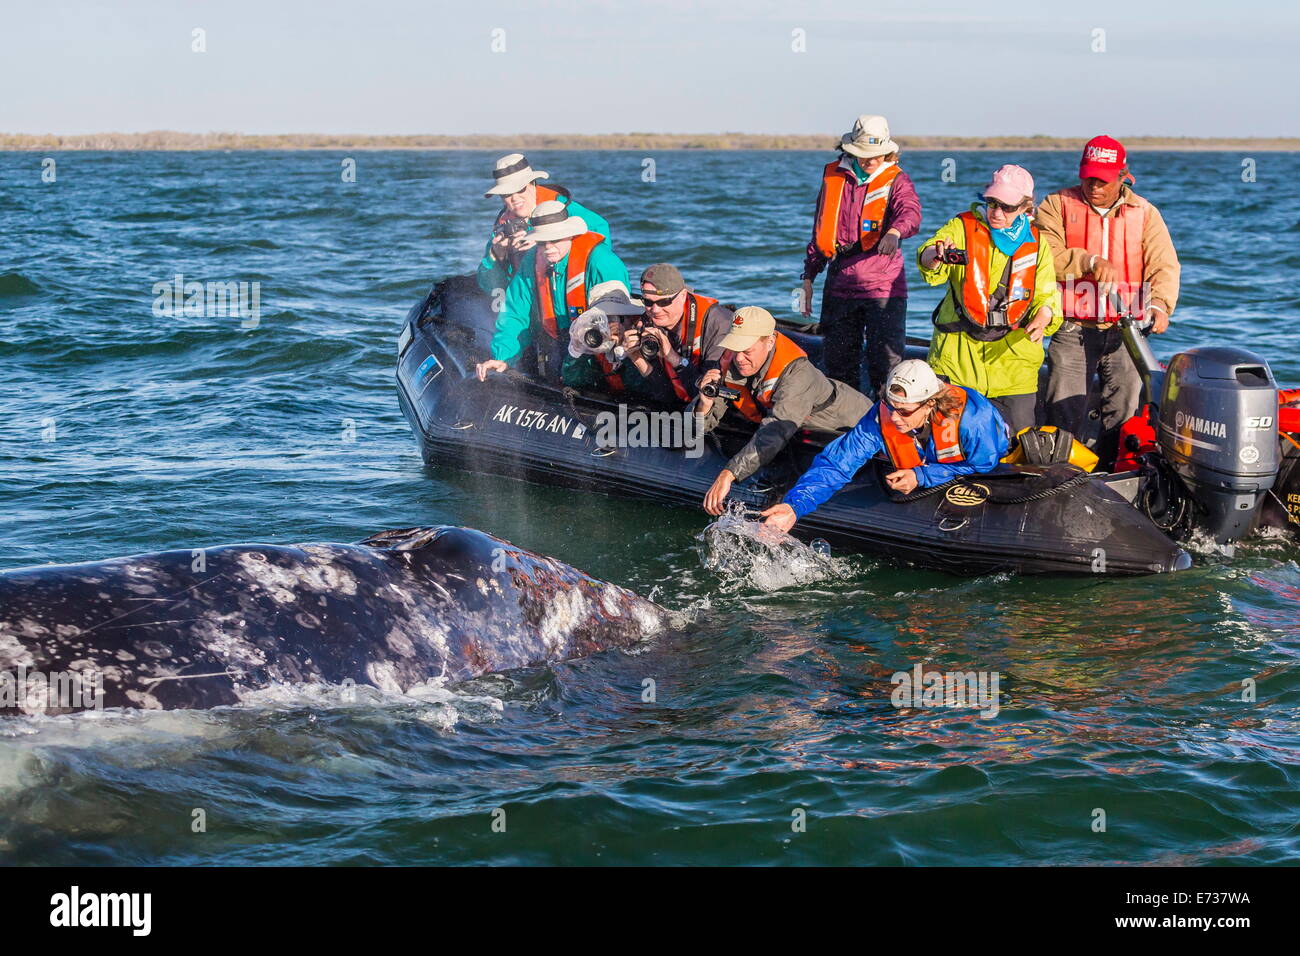 California gray whale (Eschrichtius robustus) with excited whale watchers in Magdalena Bay, Baja California Sur, Mexico Stock Photo